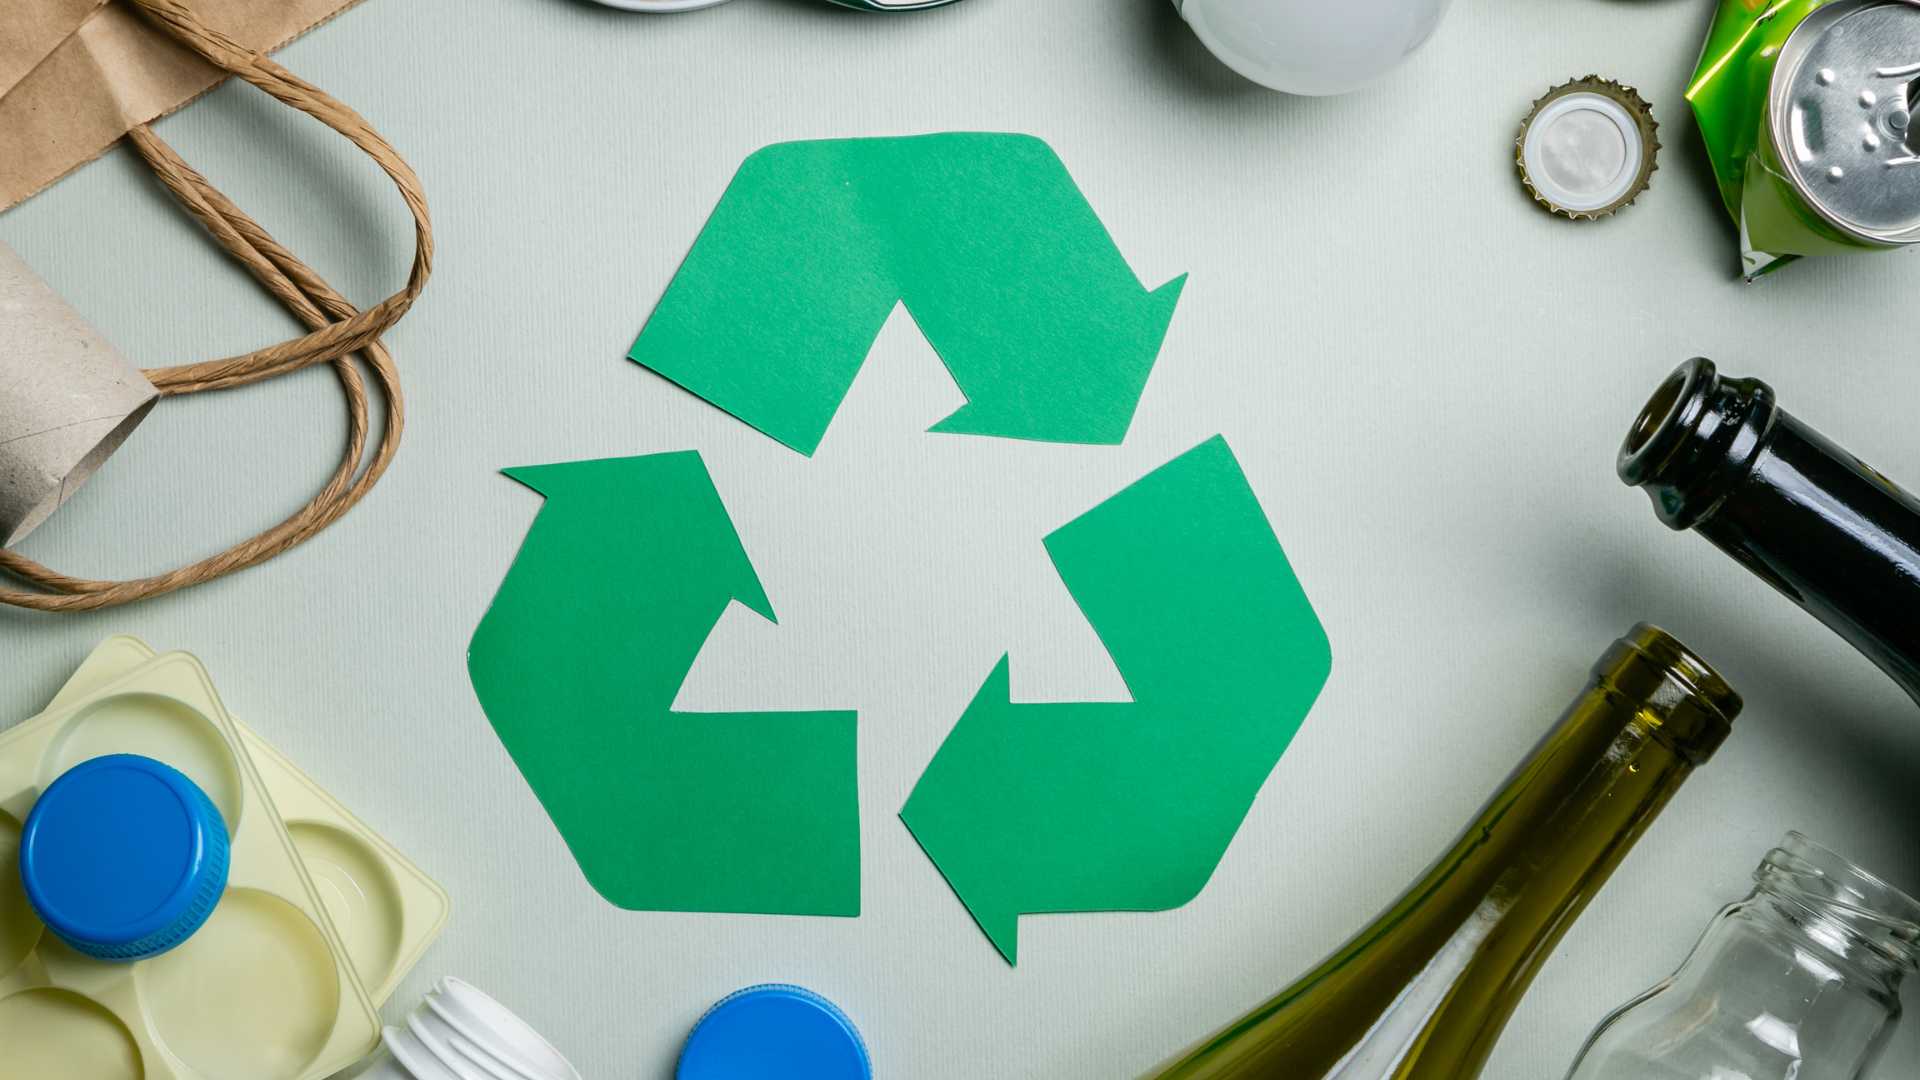 Look for Symbols for Recycling